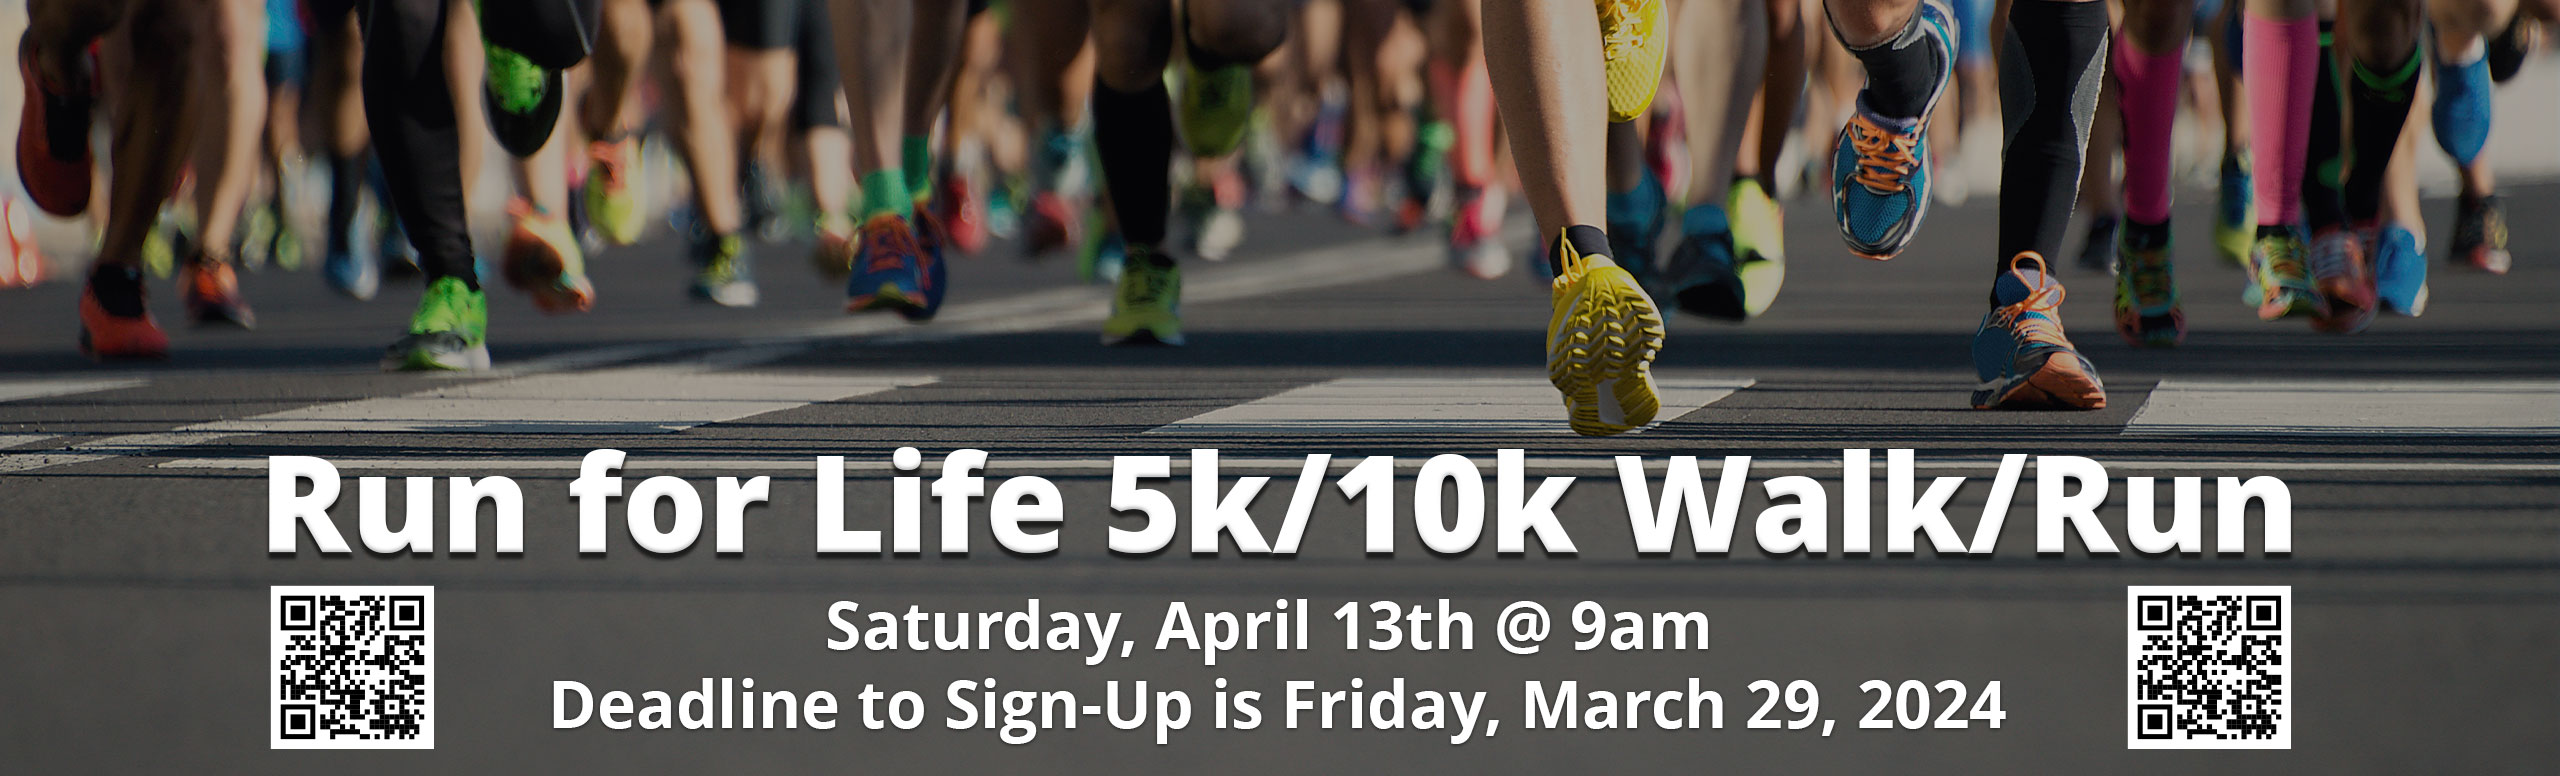 Run for Life 5k/10k Walk/Run
Saturday, April 13th @ 9am 
Deadline to Sign-Up is Friday, March 29, 2024